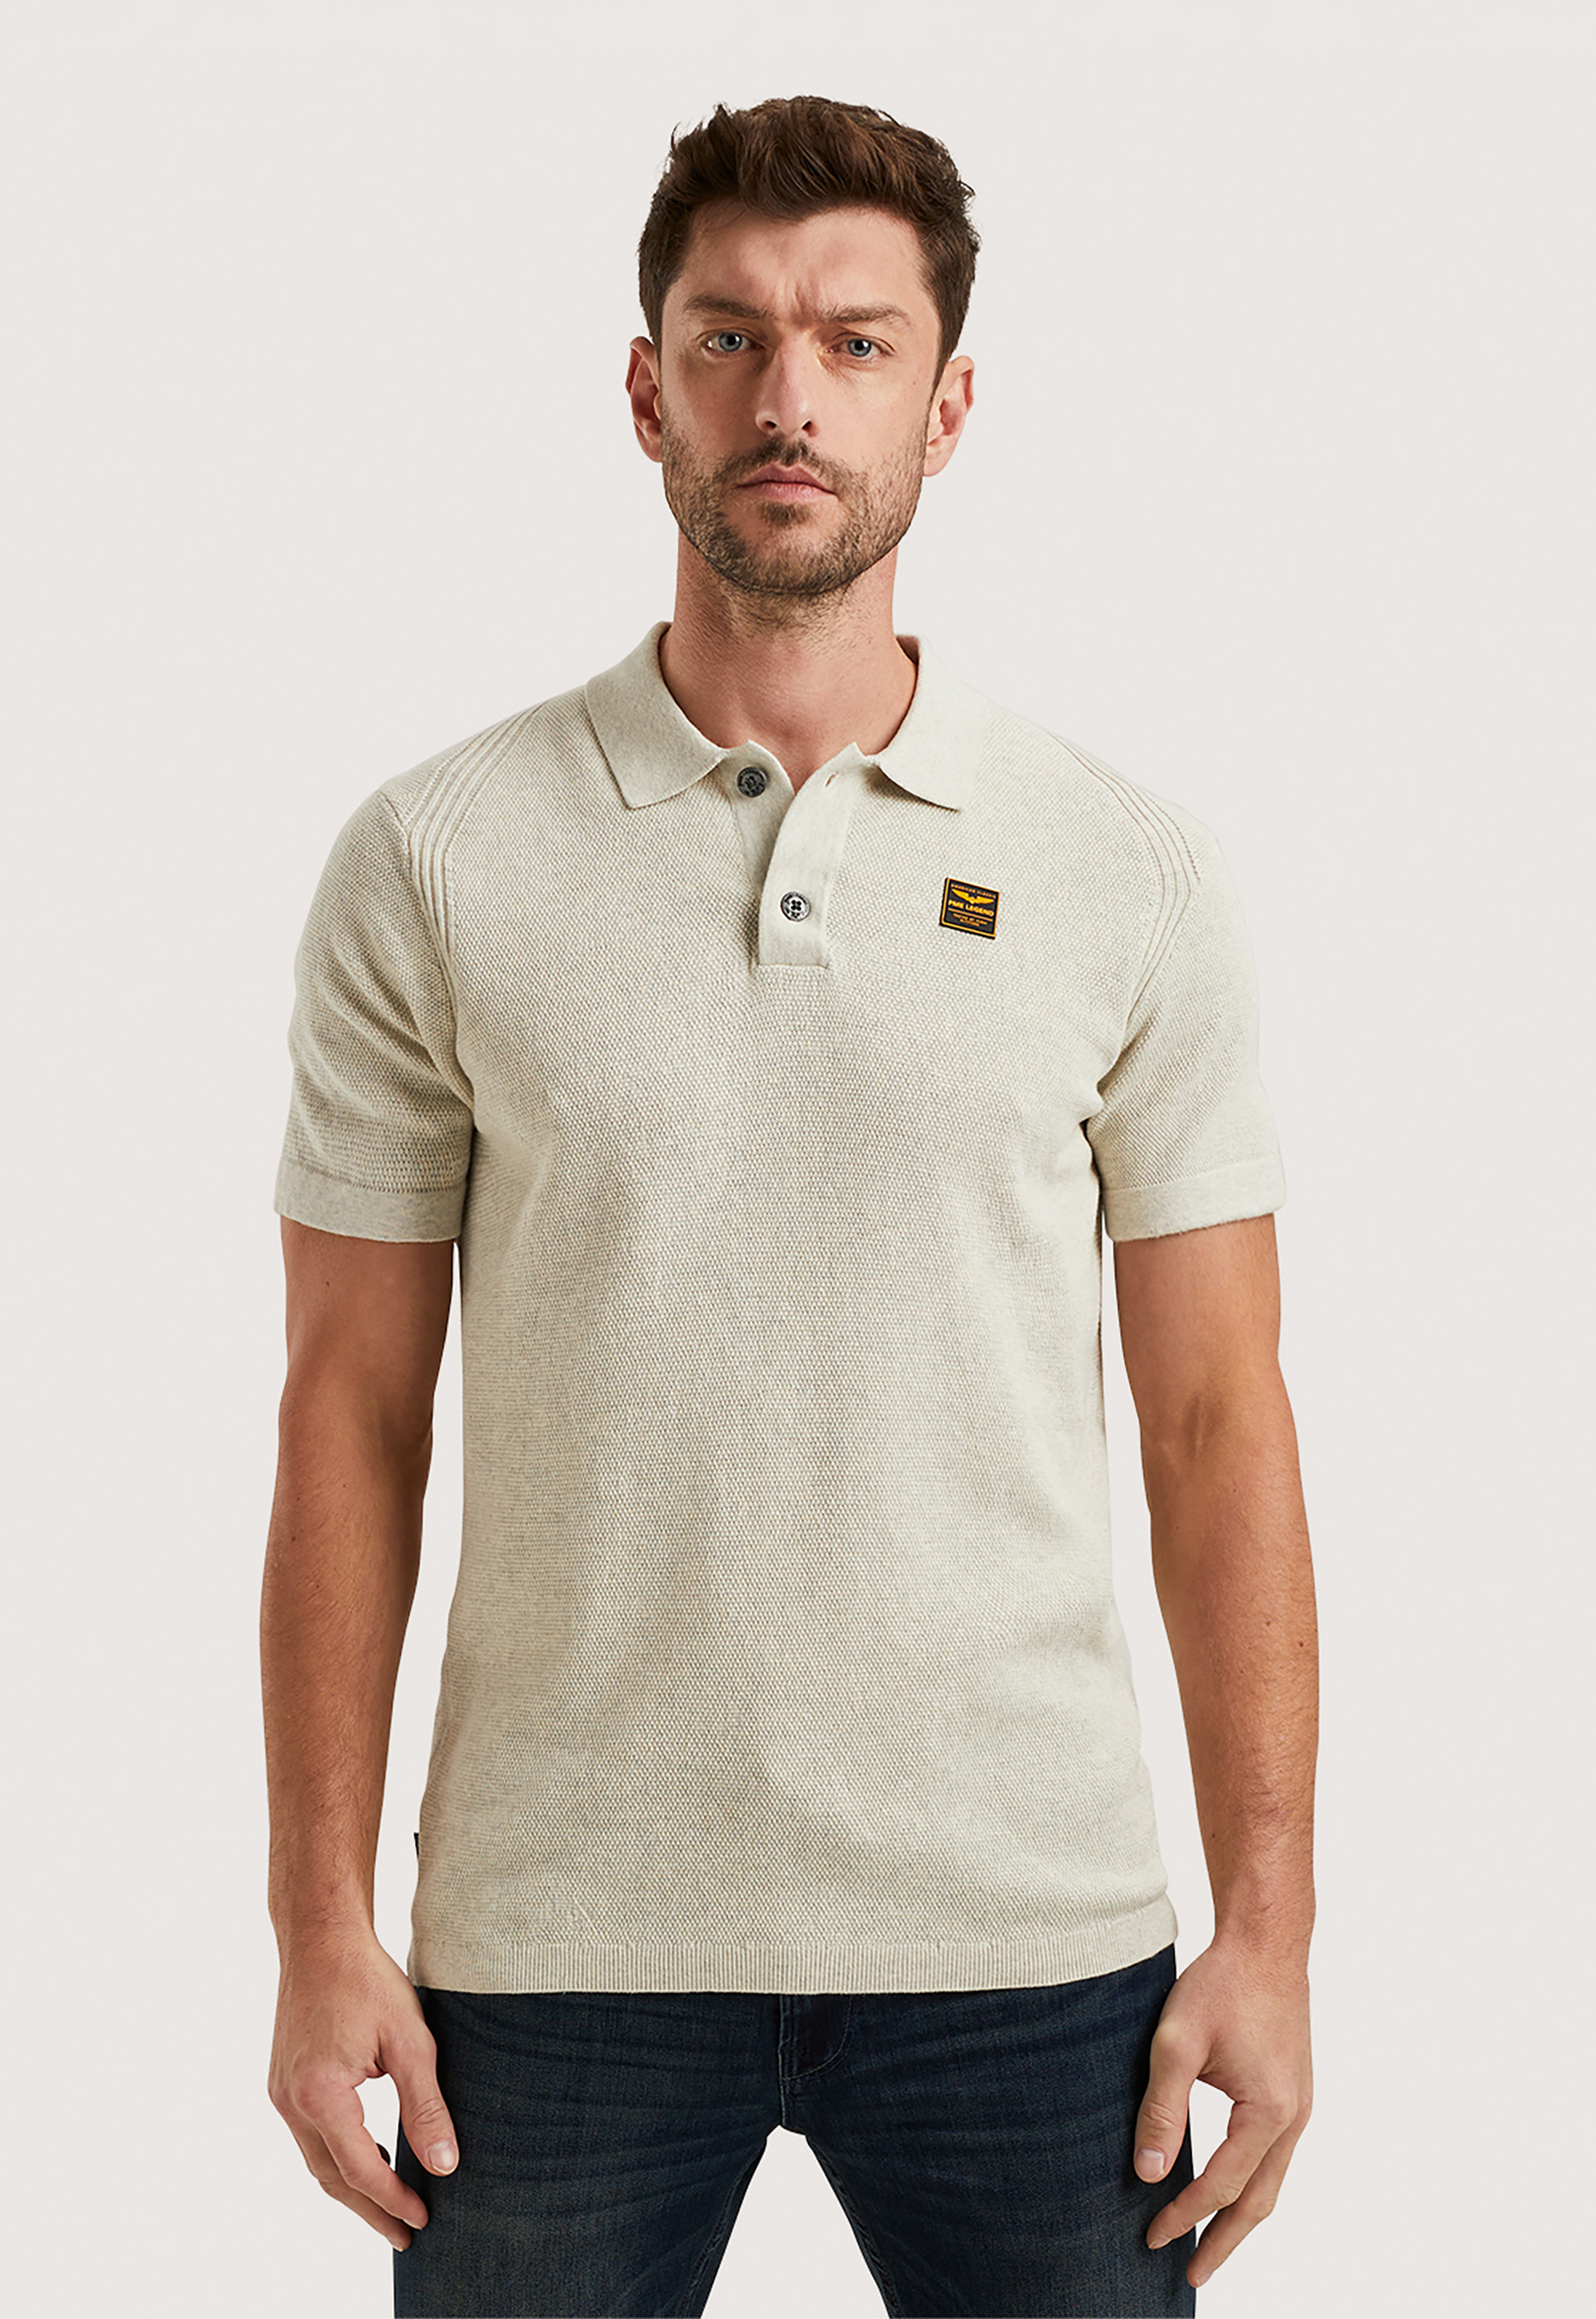 Pme legend Short Sleeve Knitted Polo